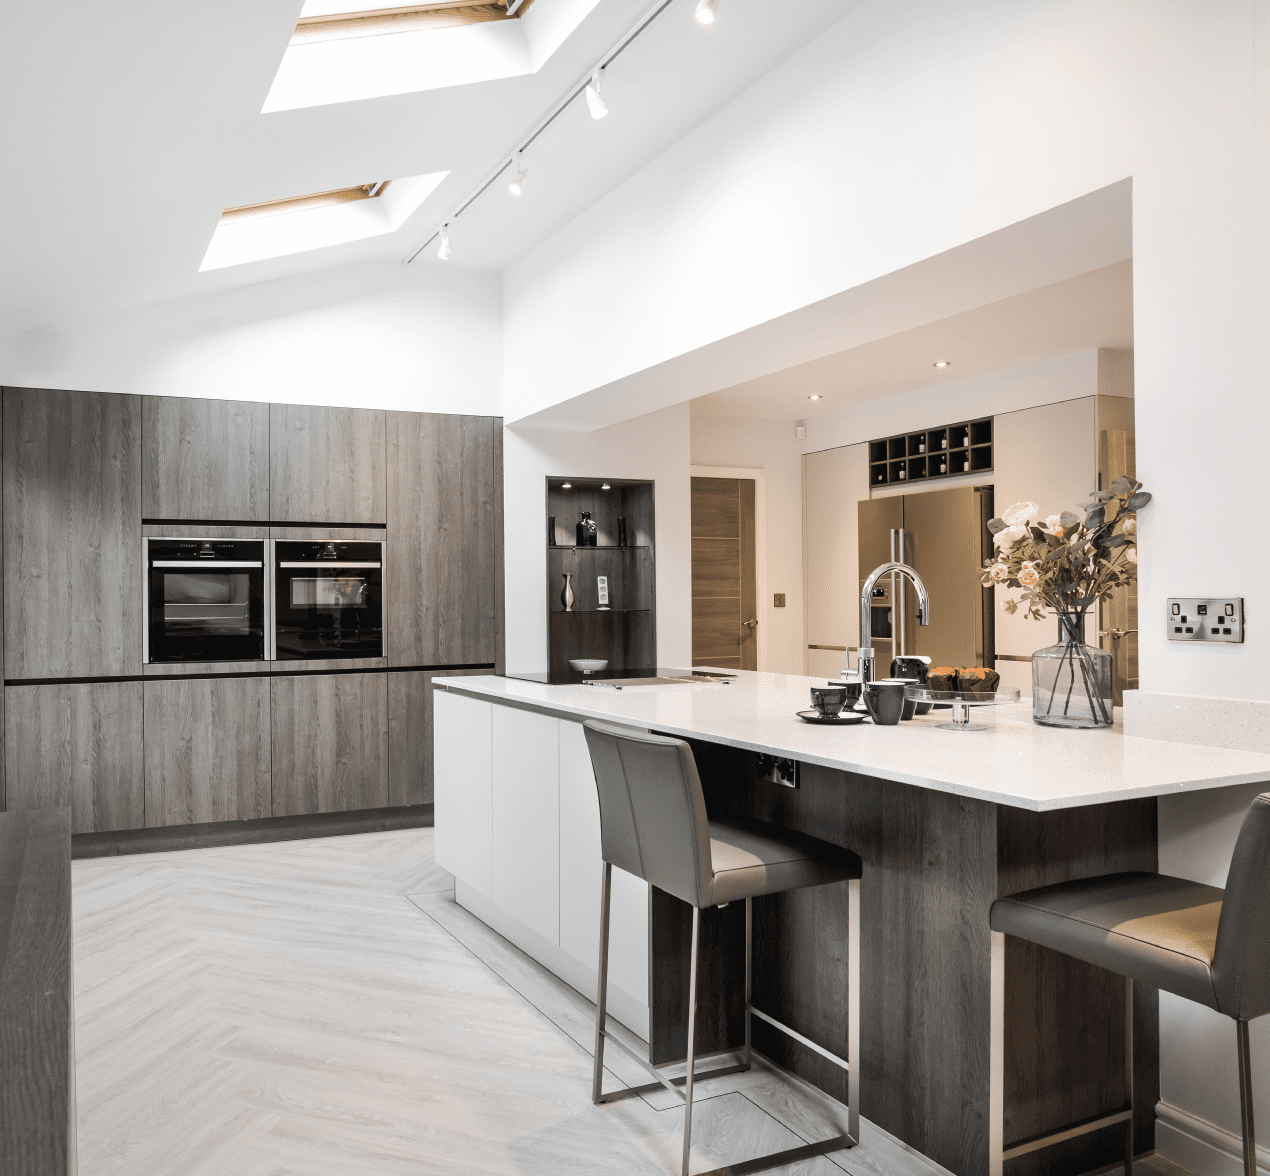 A turnkey service from Kitchen Design Centre